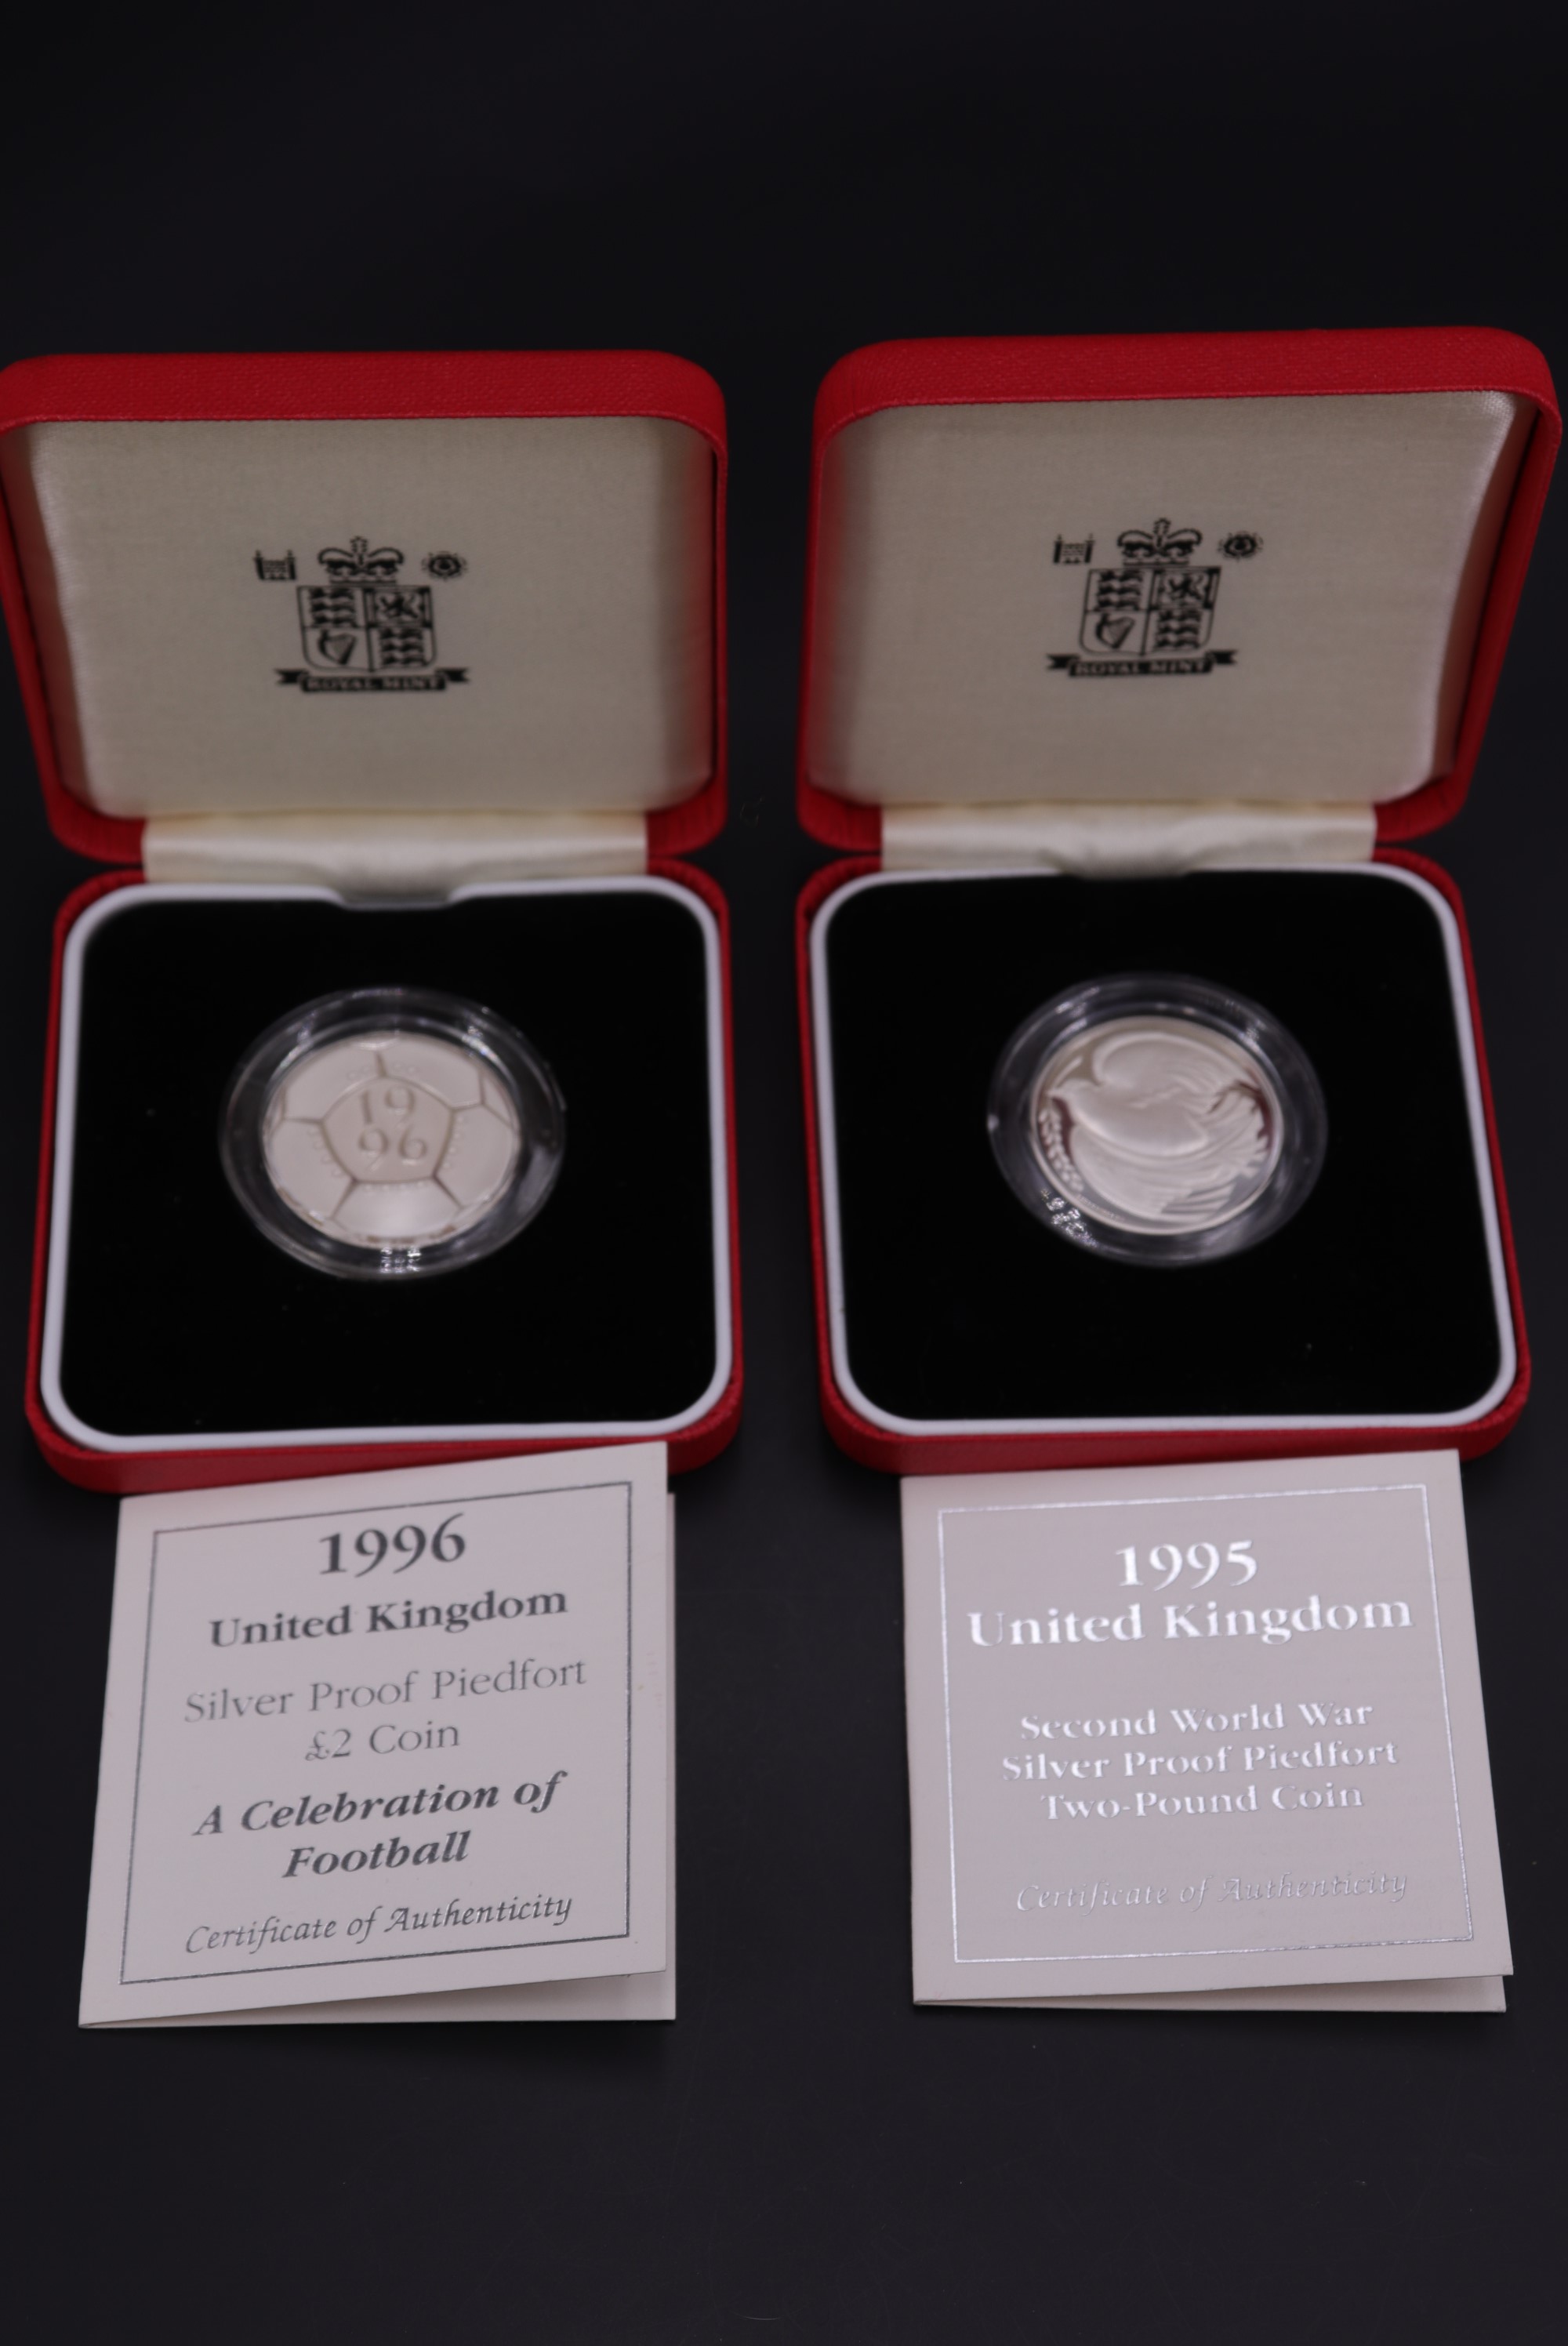 A 1996 Royal Mint silver proof Piedfort "A Celebration of Football" two pound coin, cased with - Image 2 of 2